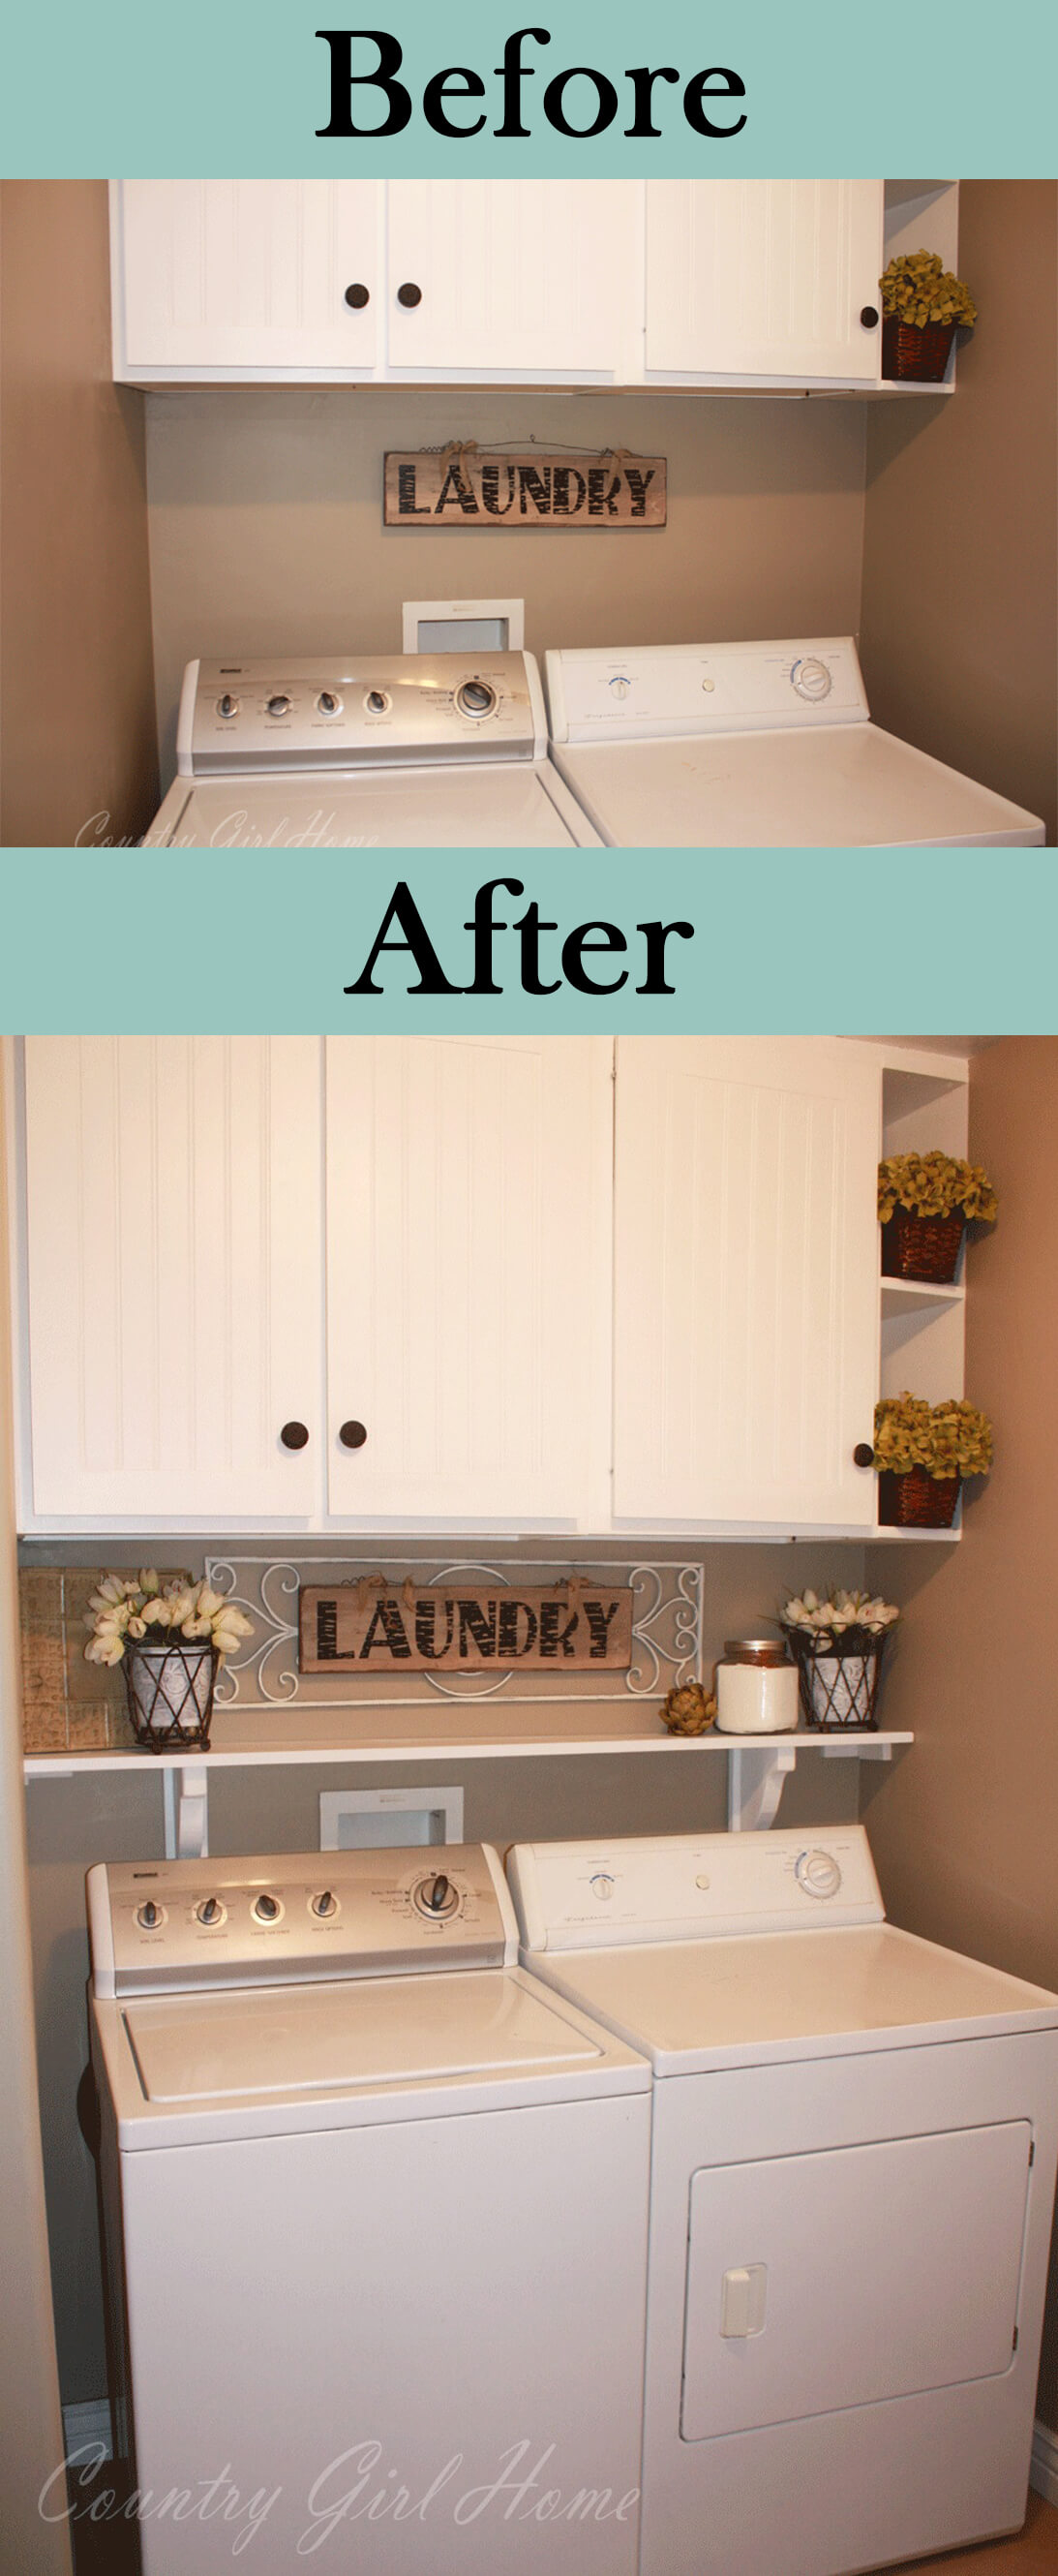 23 Best Budget Friendly Laundry Room Makeover Ideas And Designs For 2021